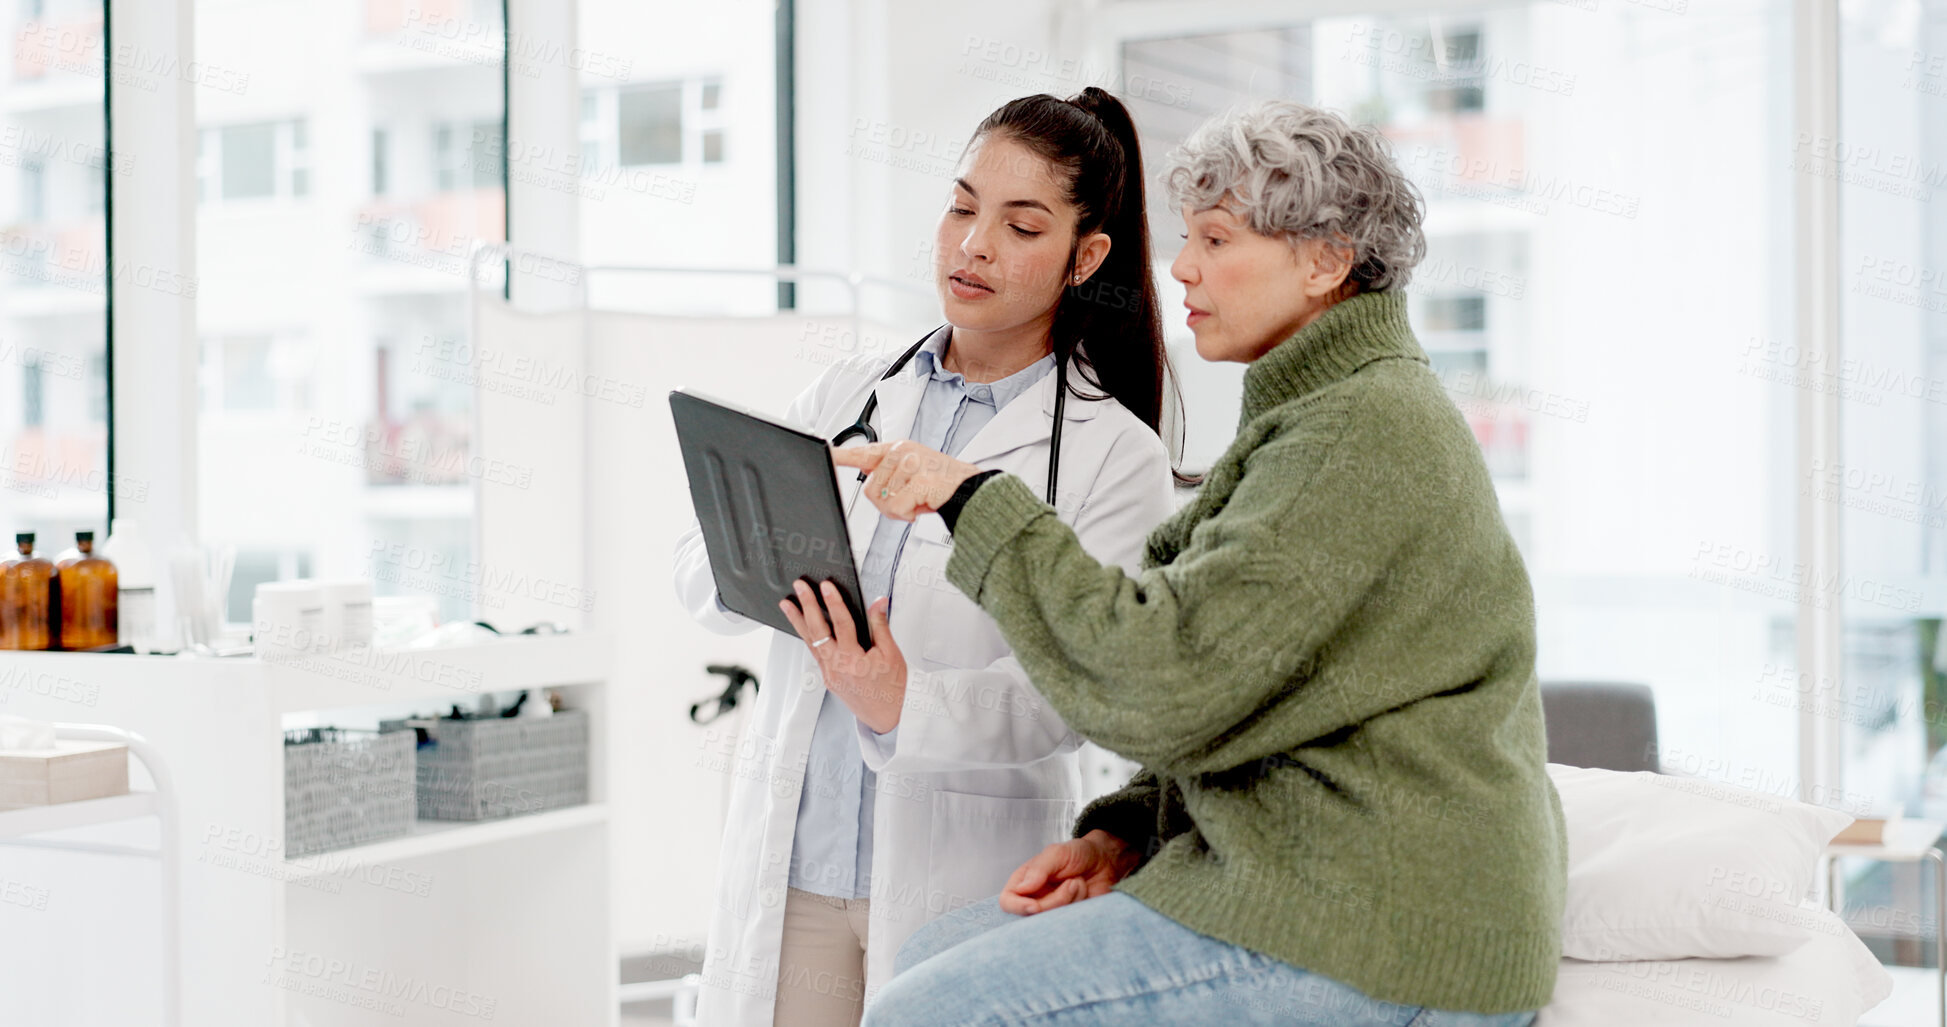 Buy stock photo Welcome, old woman or doctor shaking hands with patient in consultation for healthcare checkup at hospital. Meeting, handshake or medical worker greeting a senior person in appointment at clinic